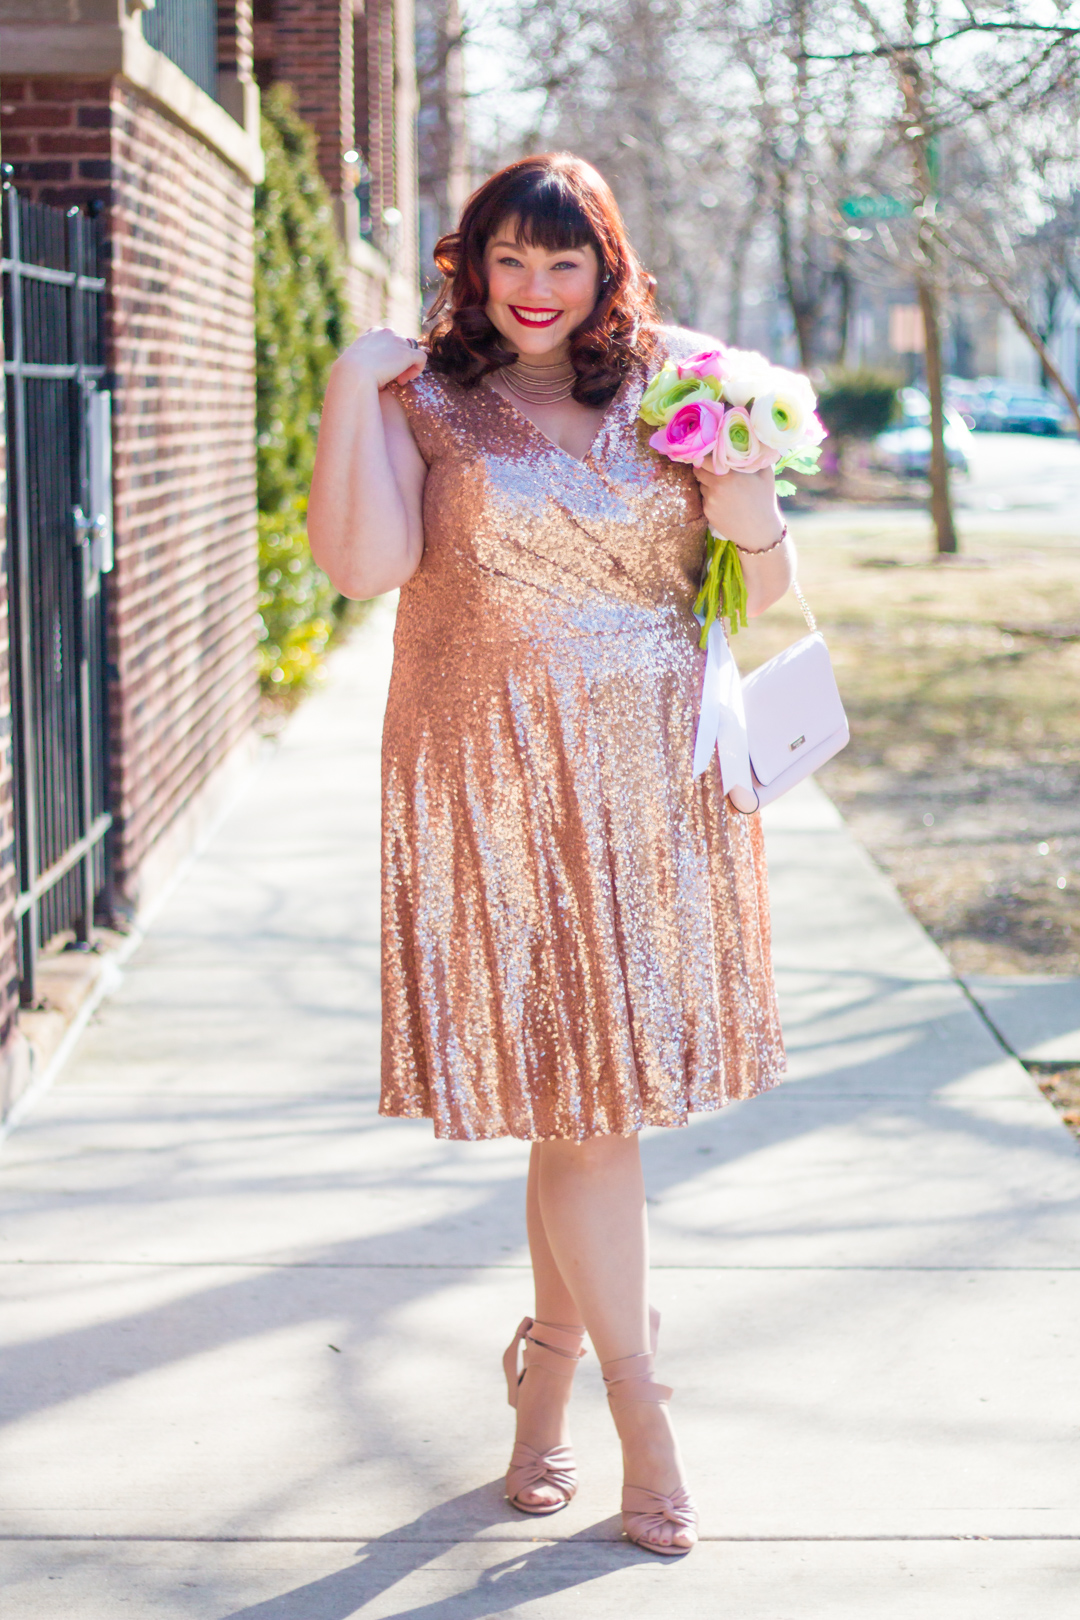 Plus Size Valentine's Style: Pink Sequin Cocktail Dress from Sydney's Closet